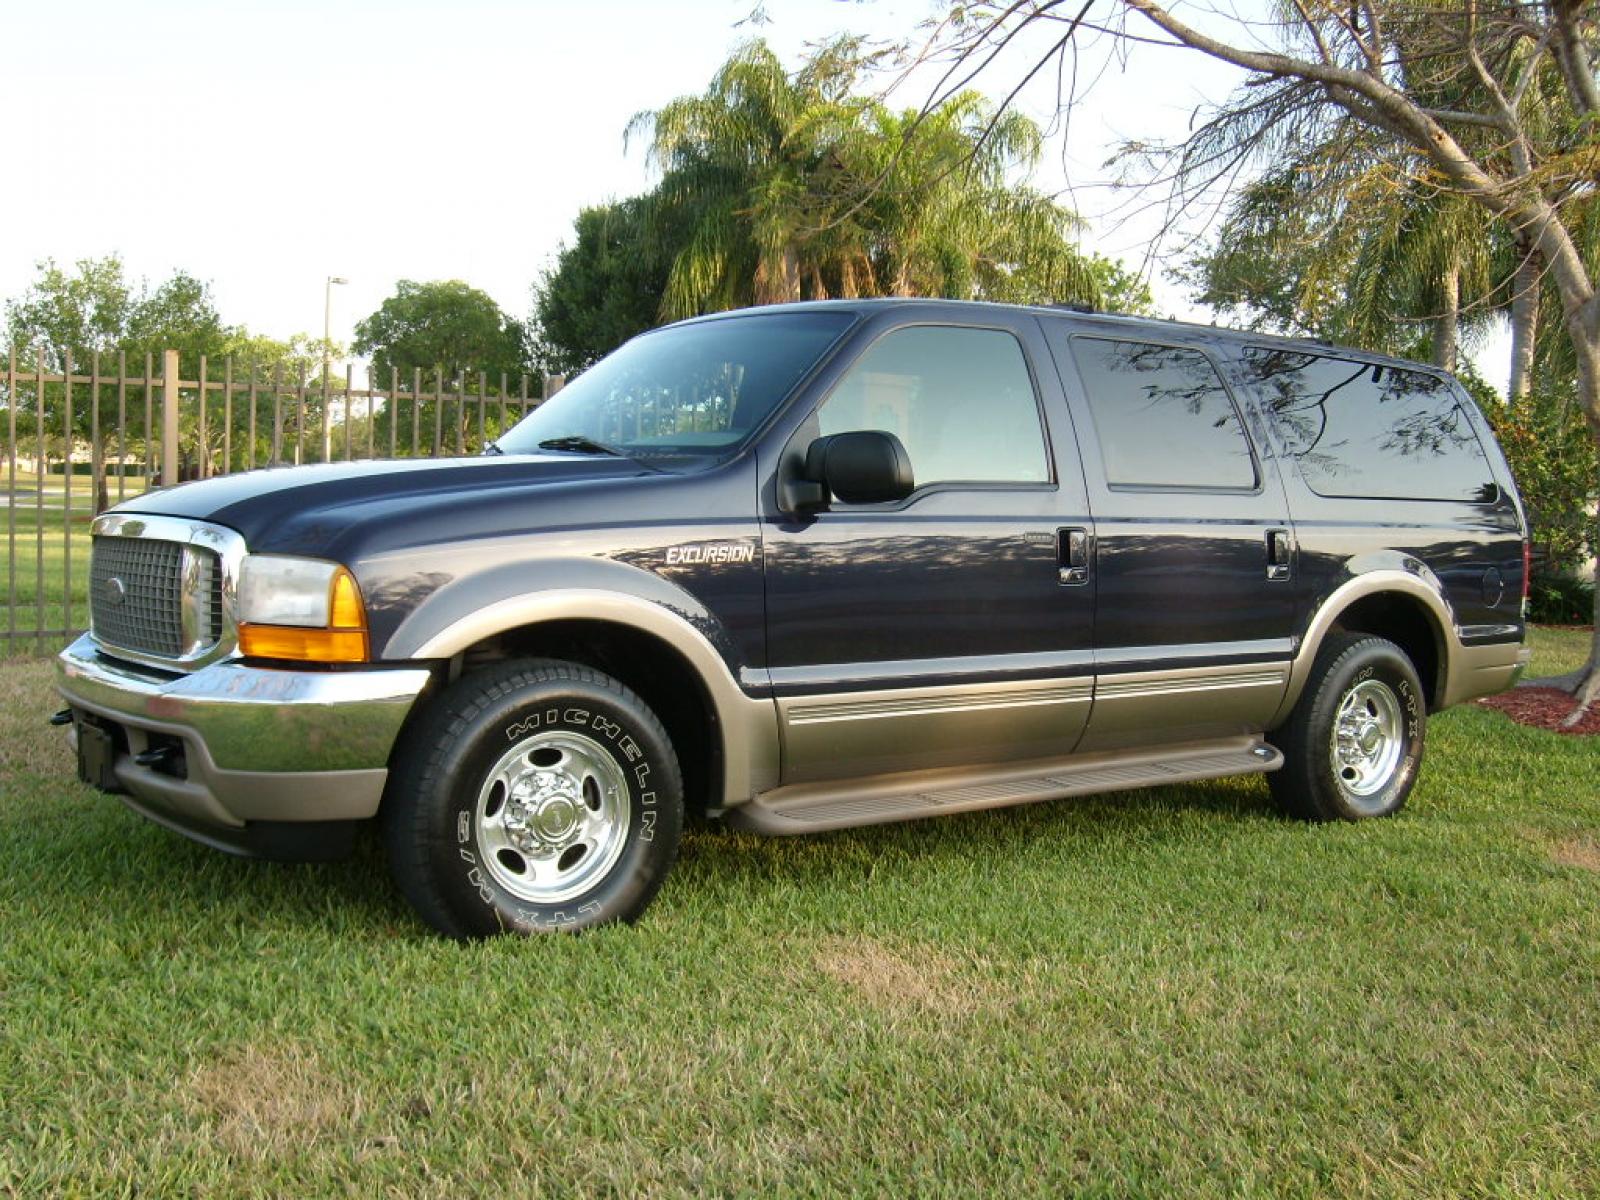 Ford Excursion #8 - size 1600.